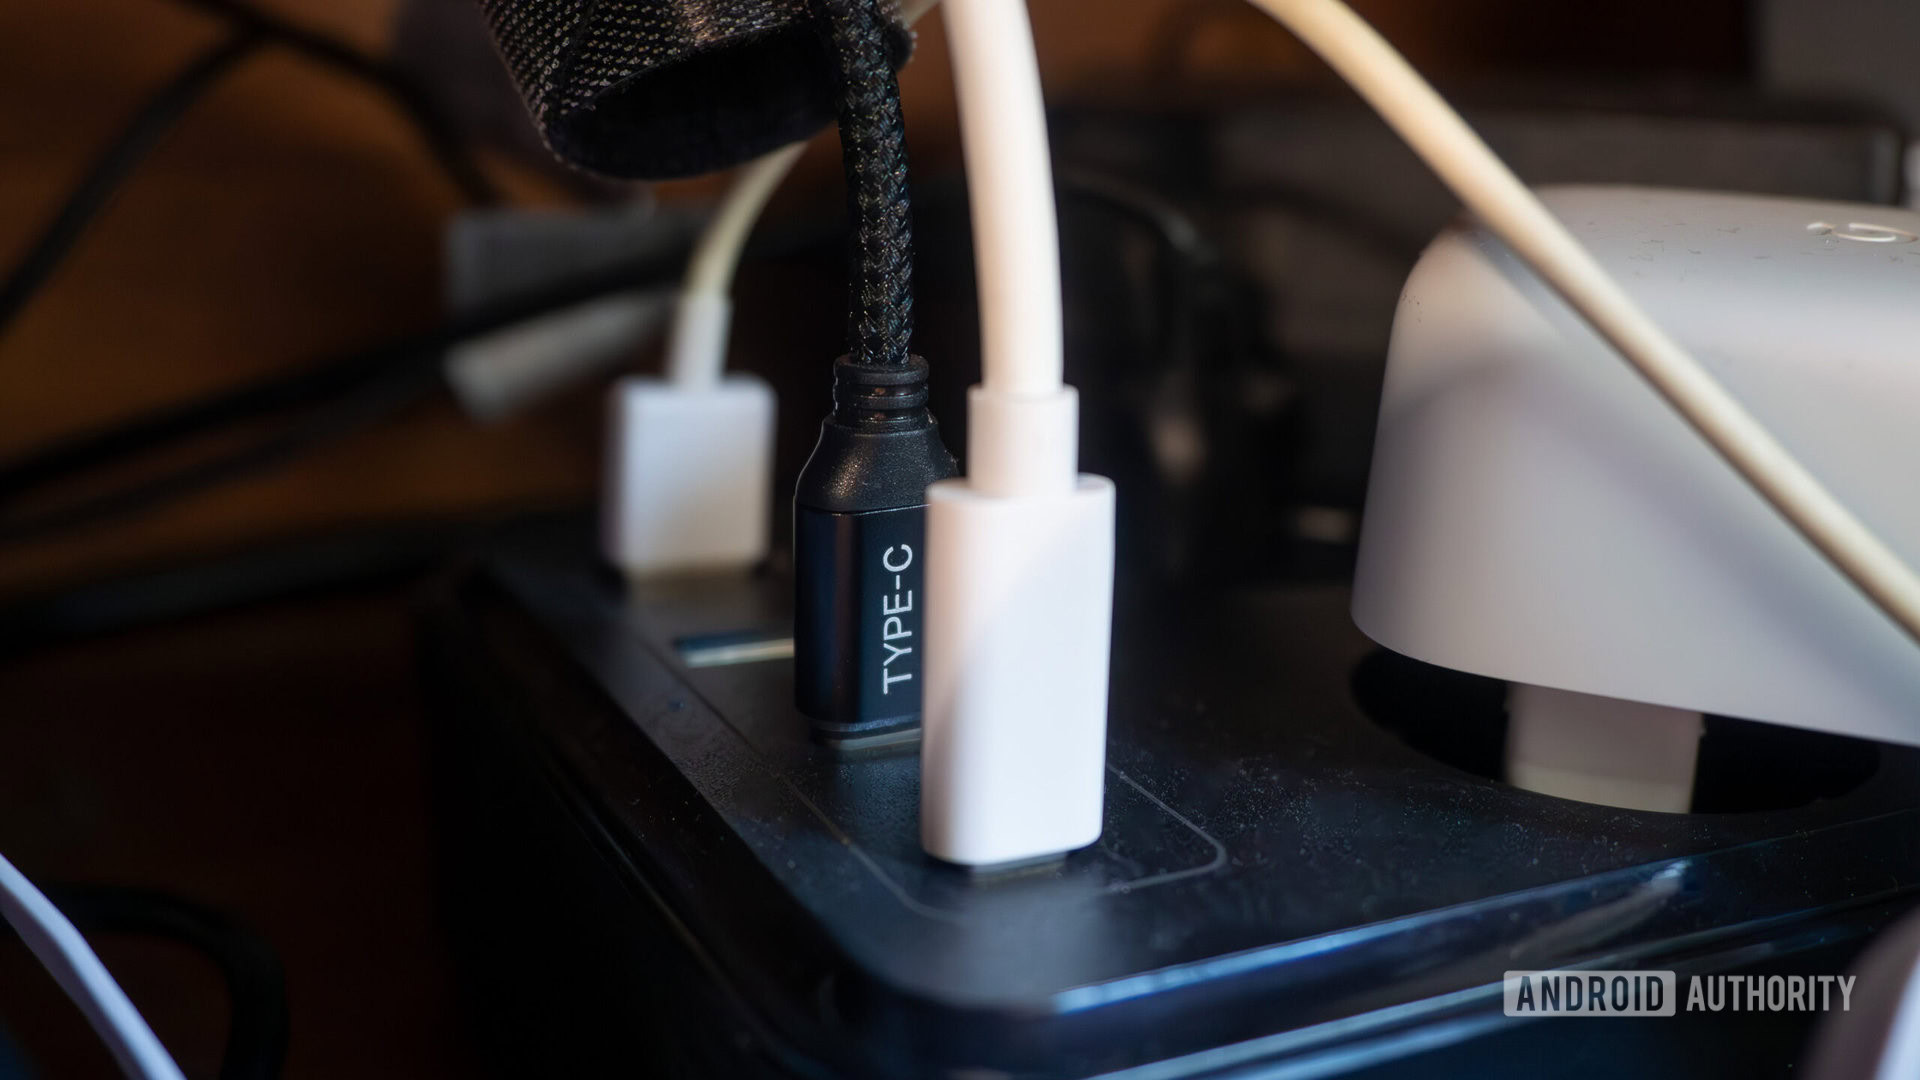 Stay plugged in: Here's a handy guide to plugs and sockets for